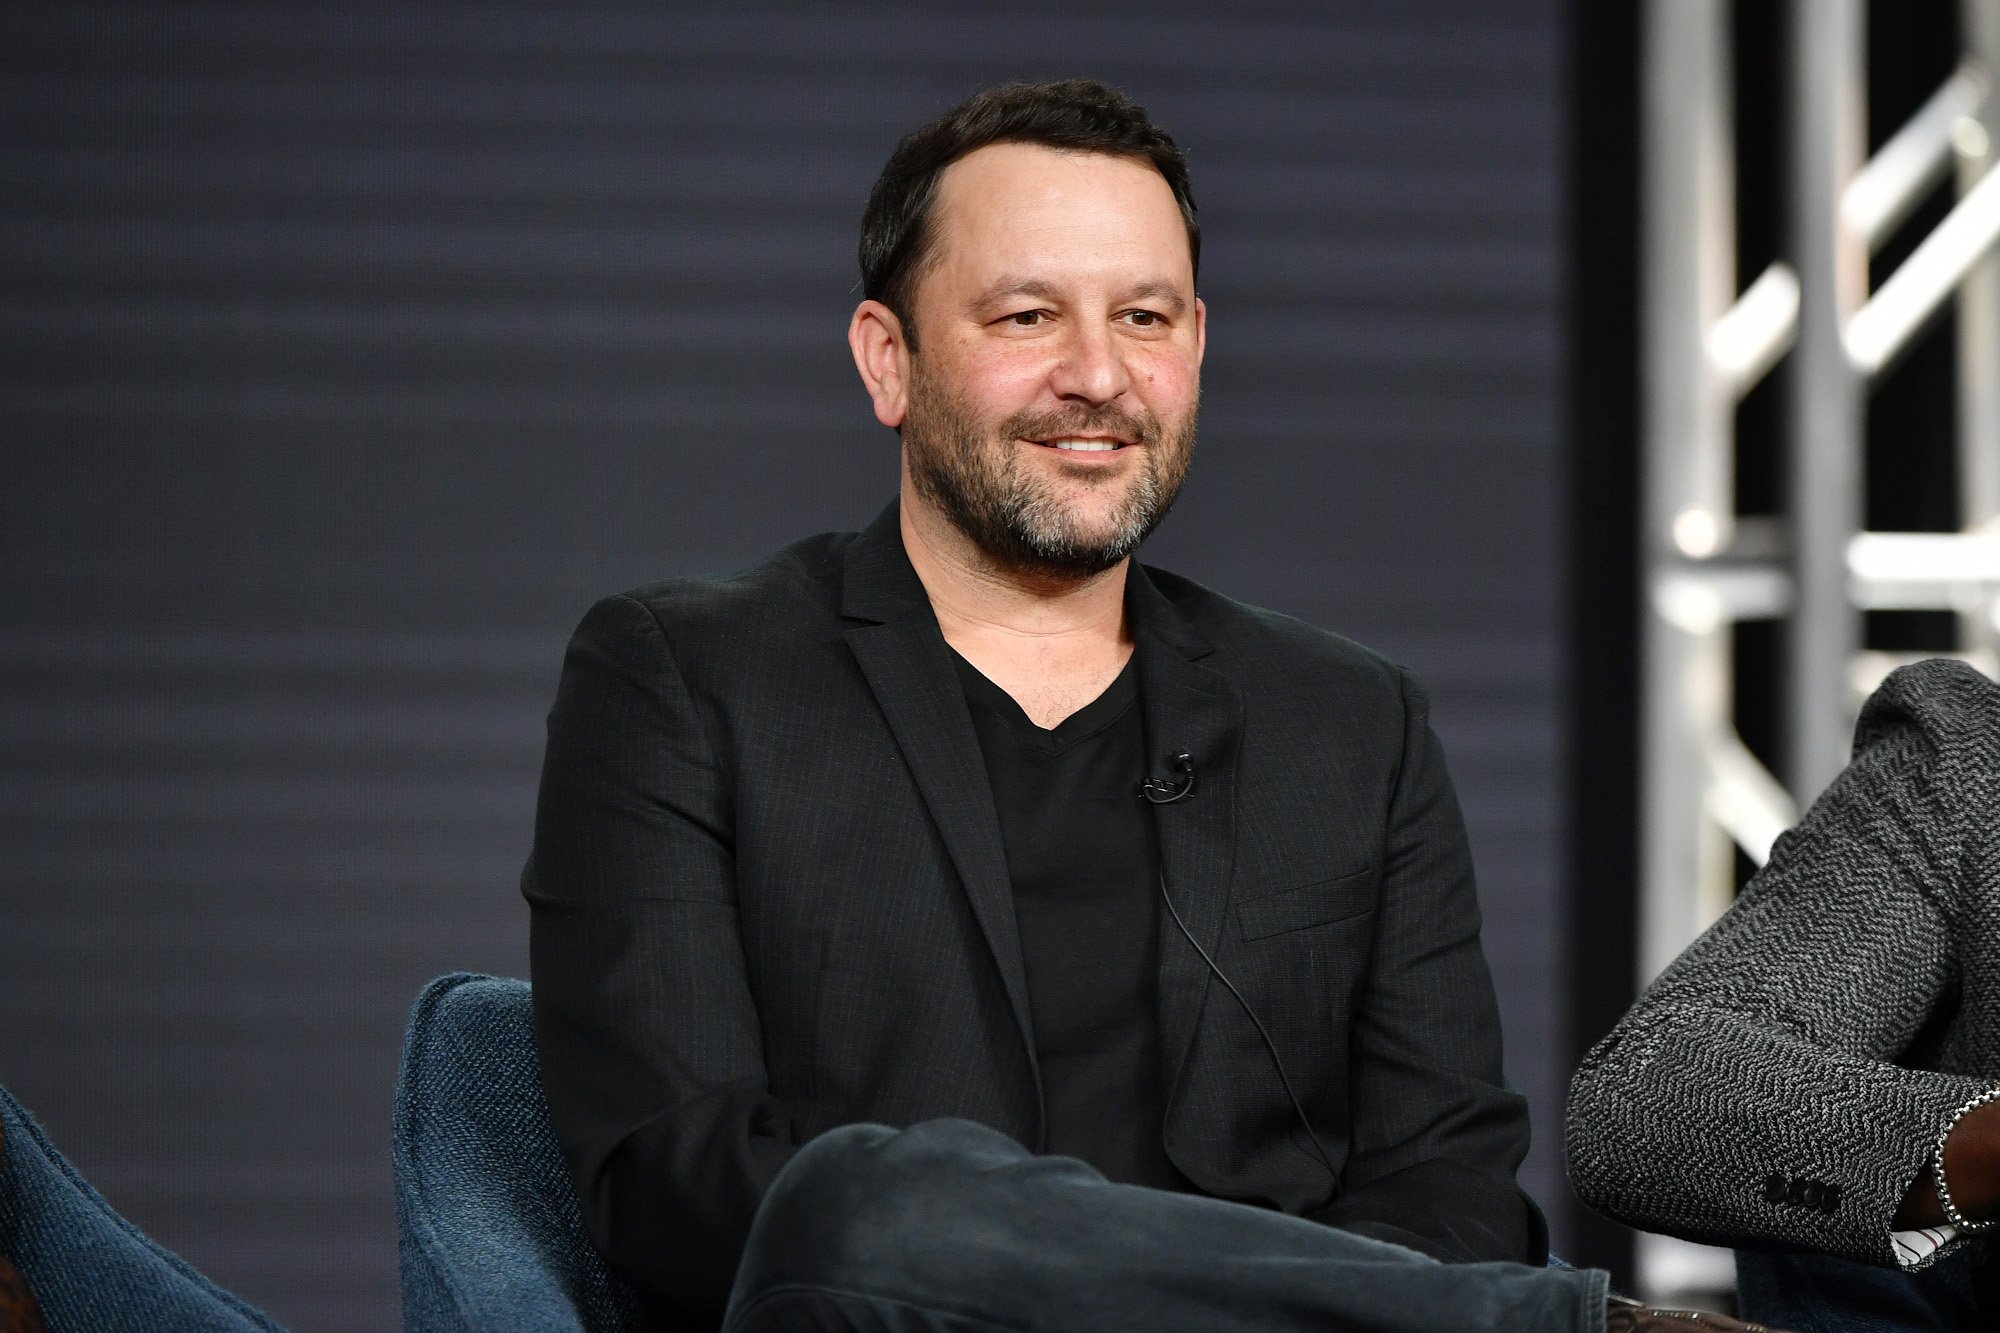 'This Is Us' creator Dan Fogelman who opened up about the series finale. He's sitting in a blue seat, wearing a black shirt and jacket, and looking out at the audience.